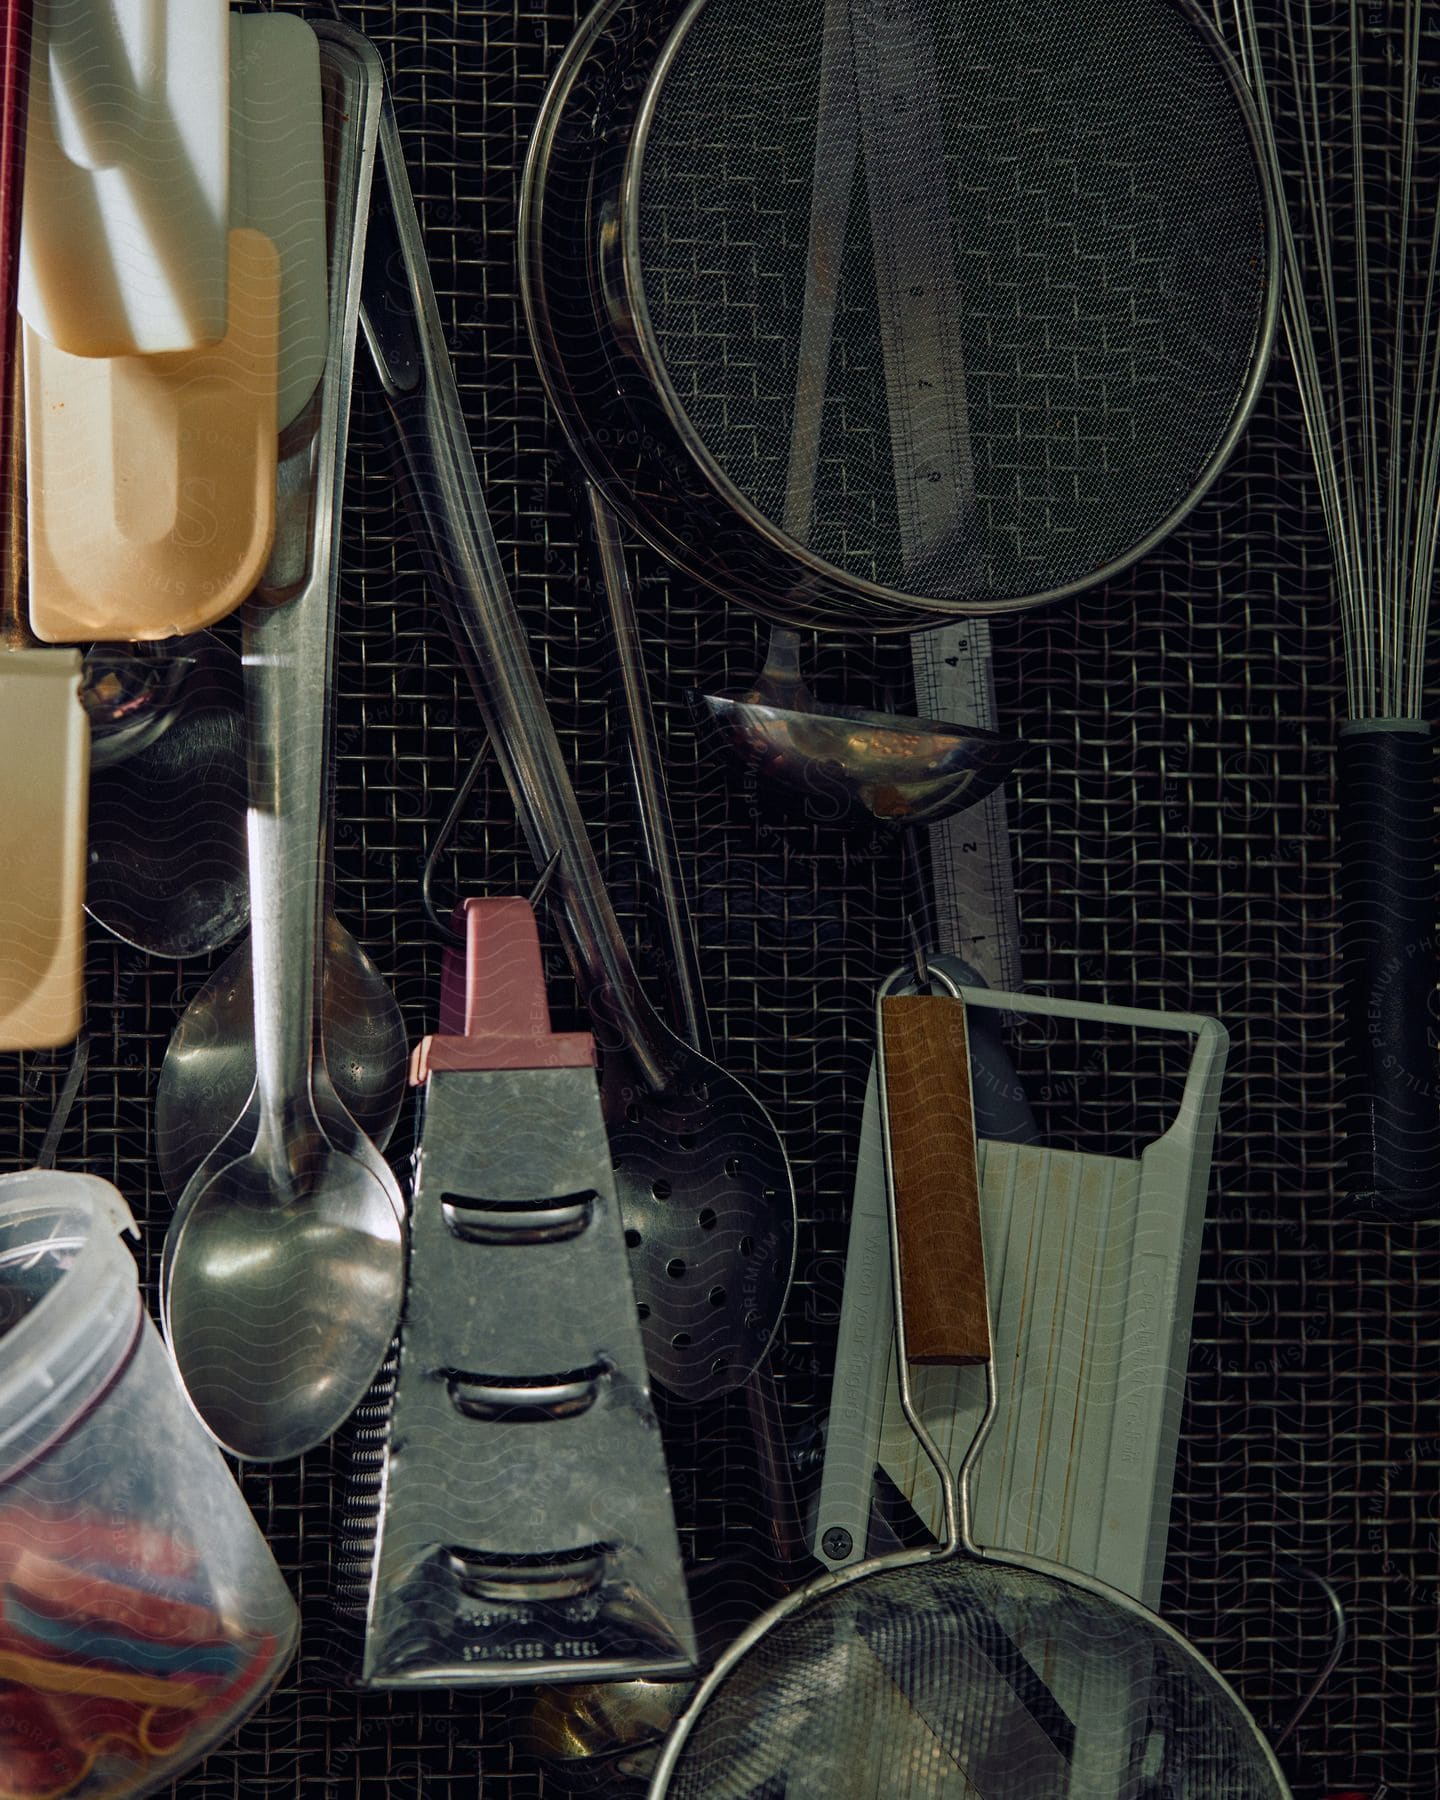 Kitchen utensils hanging from a wall